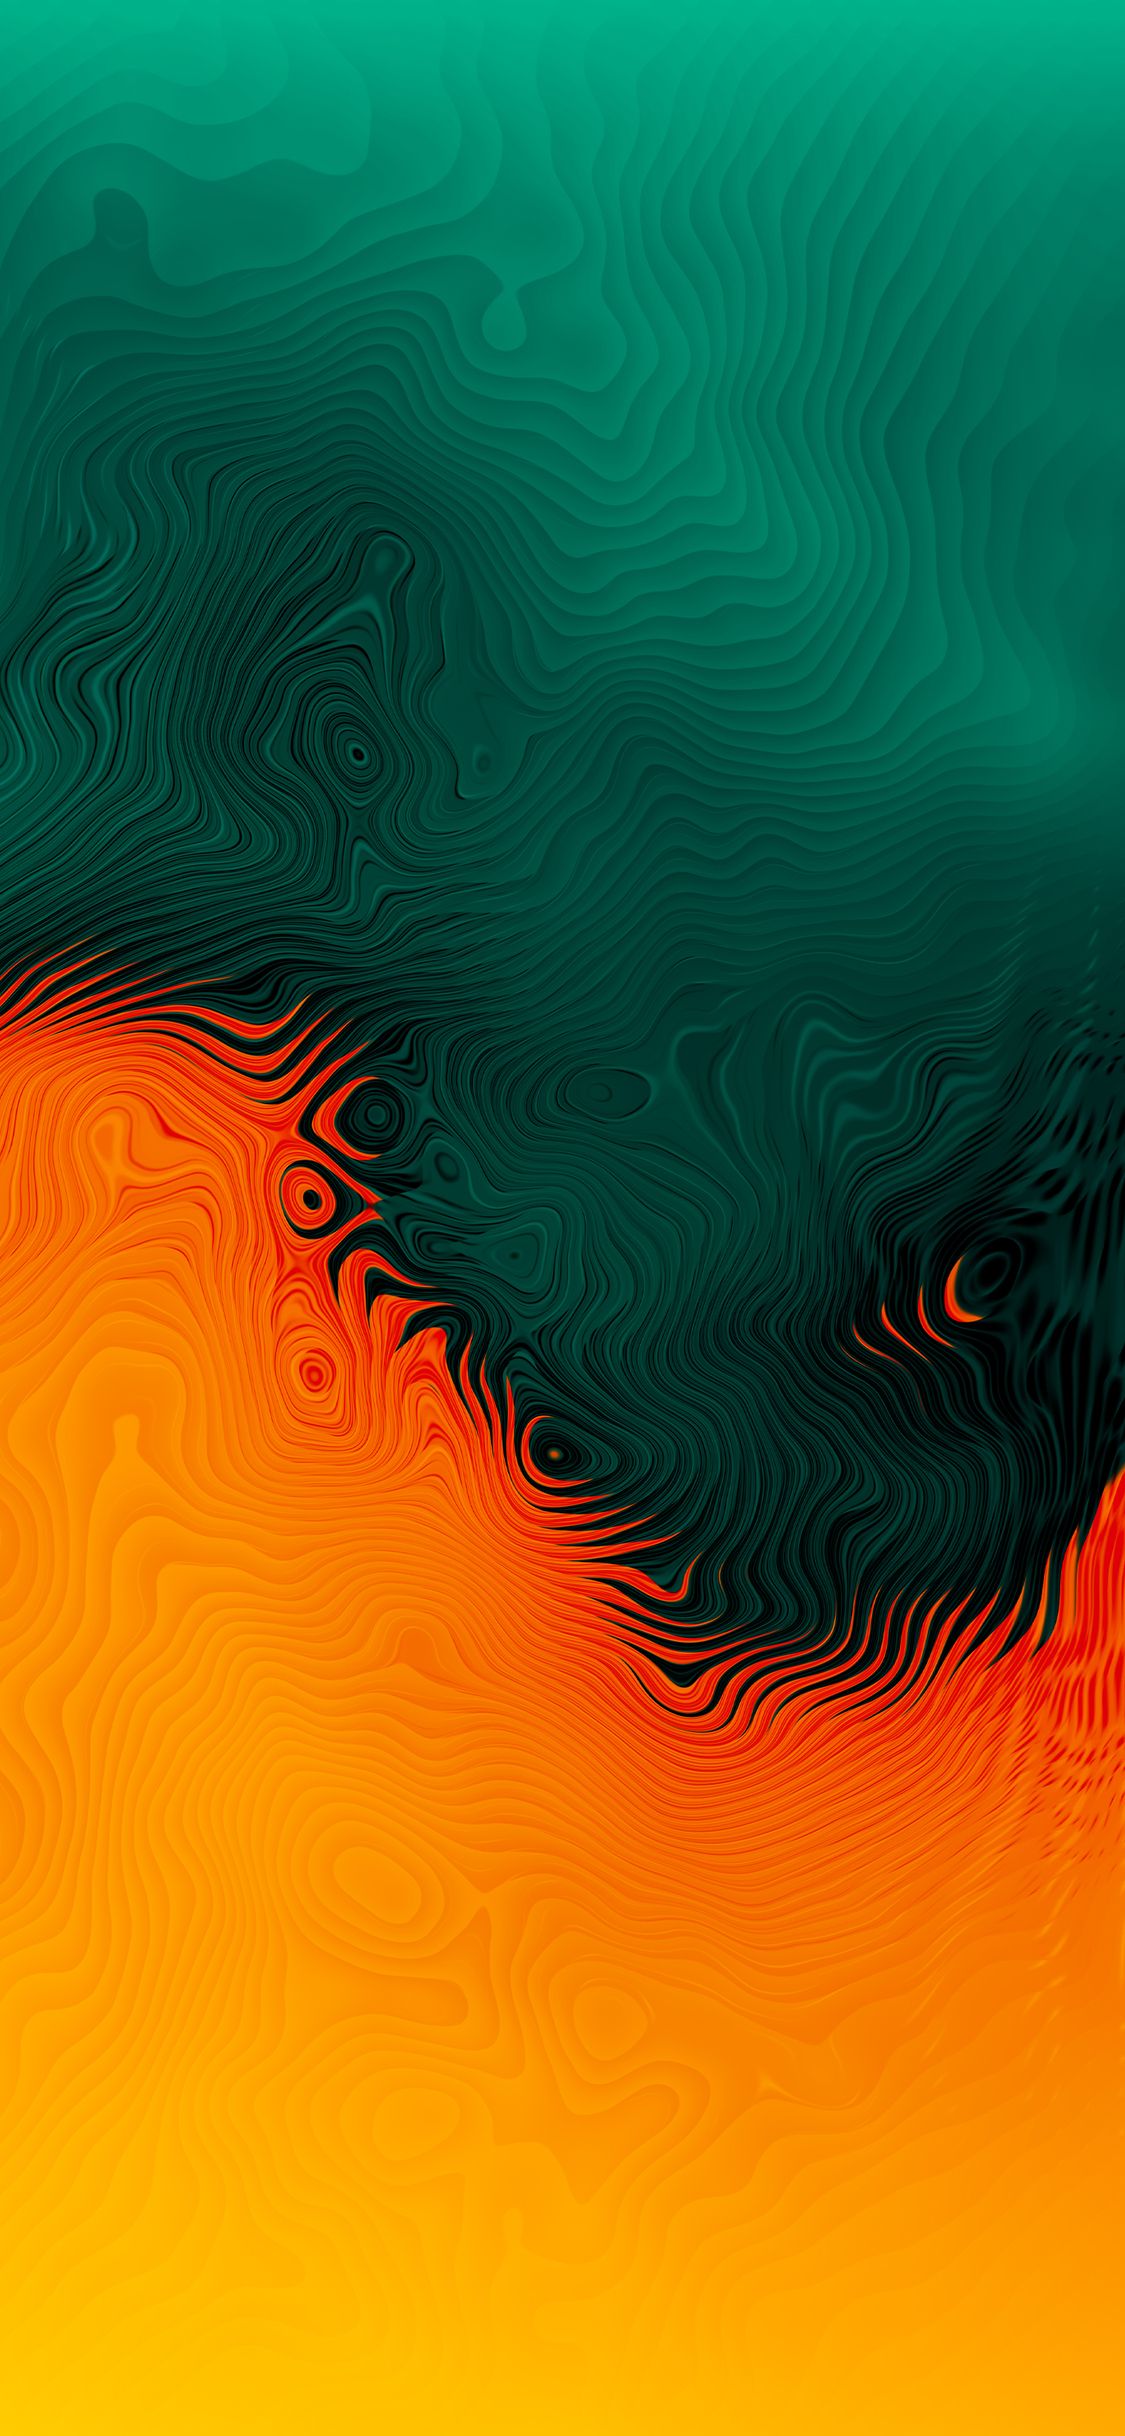 Orange and Green iPhone Wallpaper Free Orange and Green iPhone Background